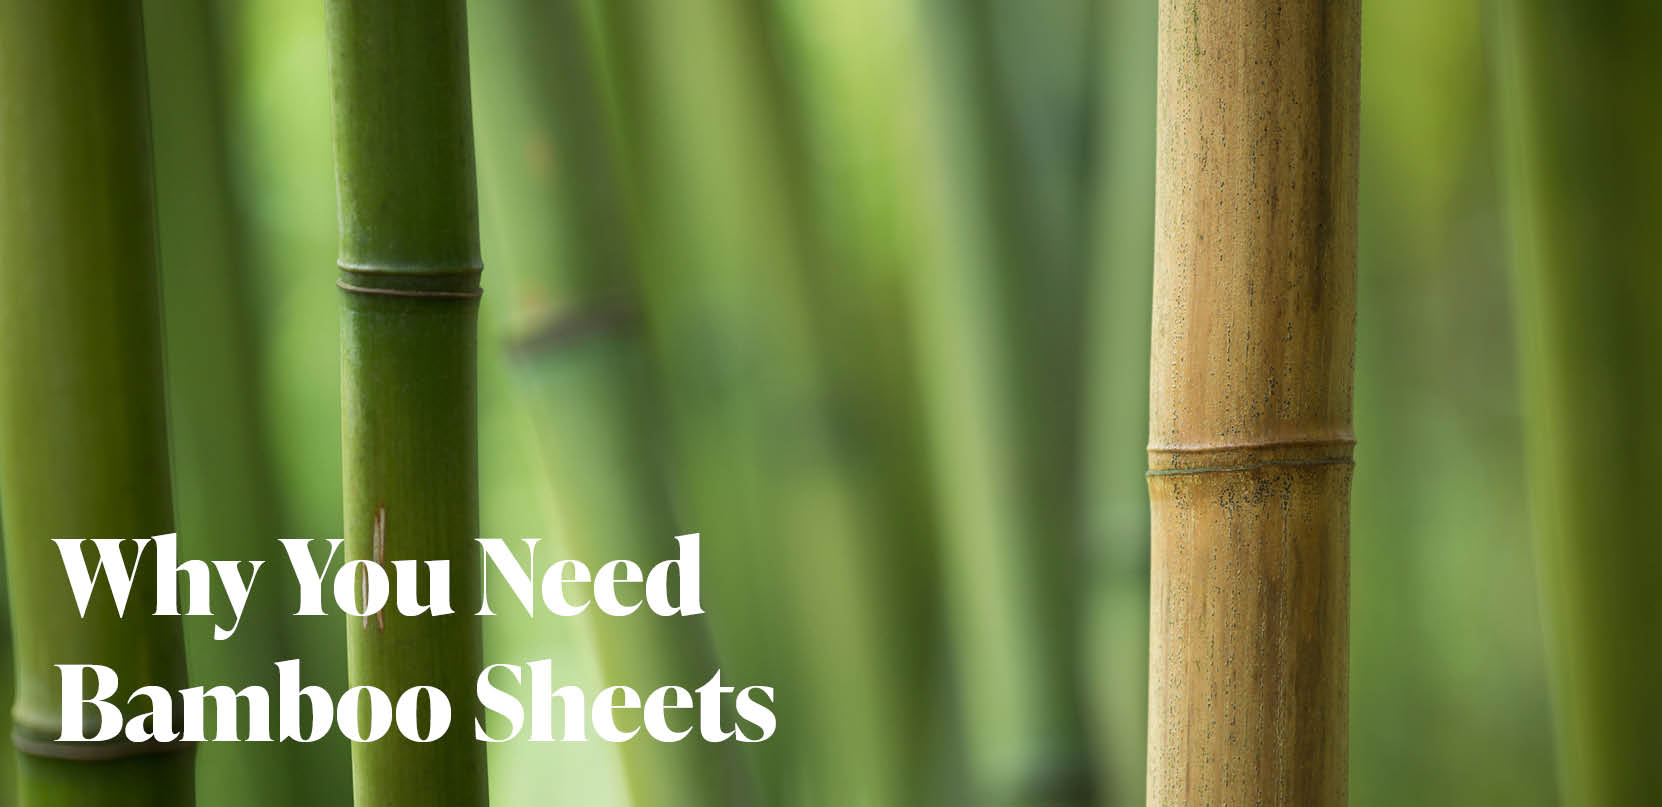 Why You Need Bamboo Sheets